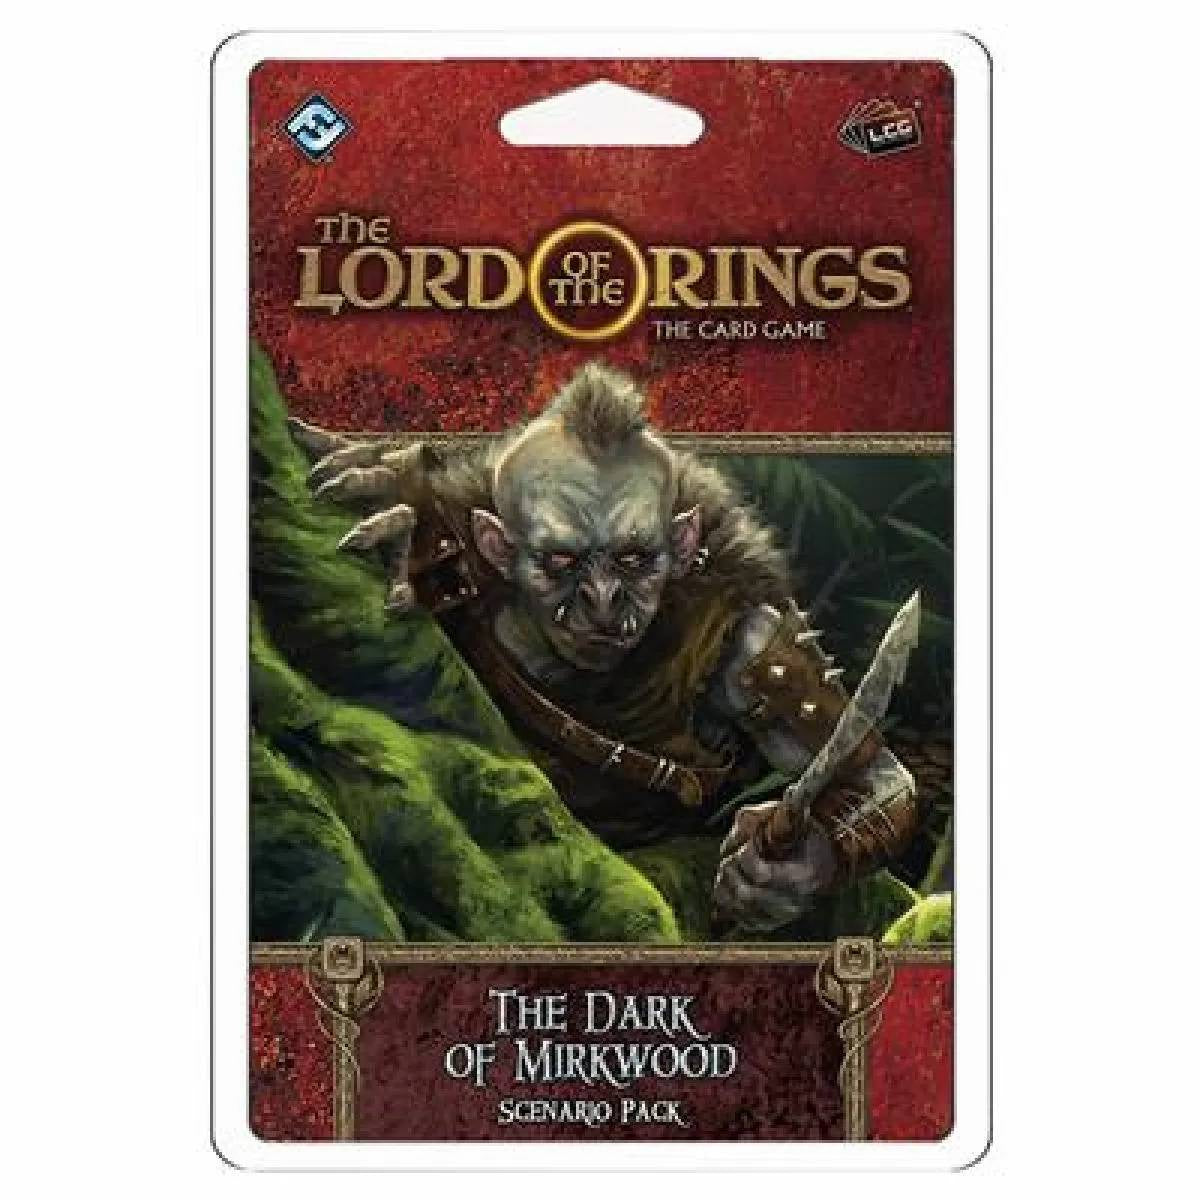 Lord of the Rings The Card Game Revised The Dark of Mirkwood Scenario